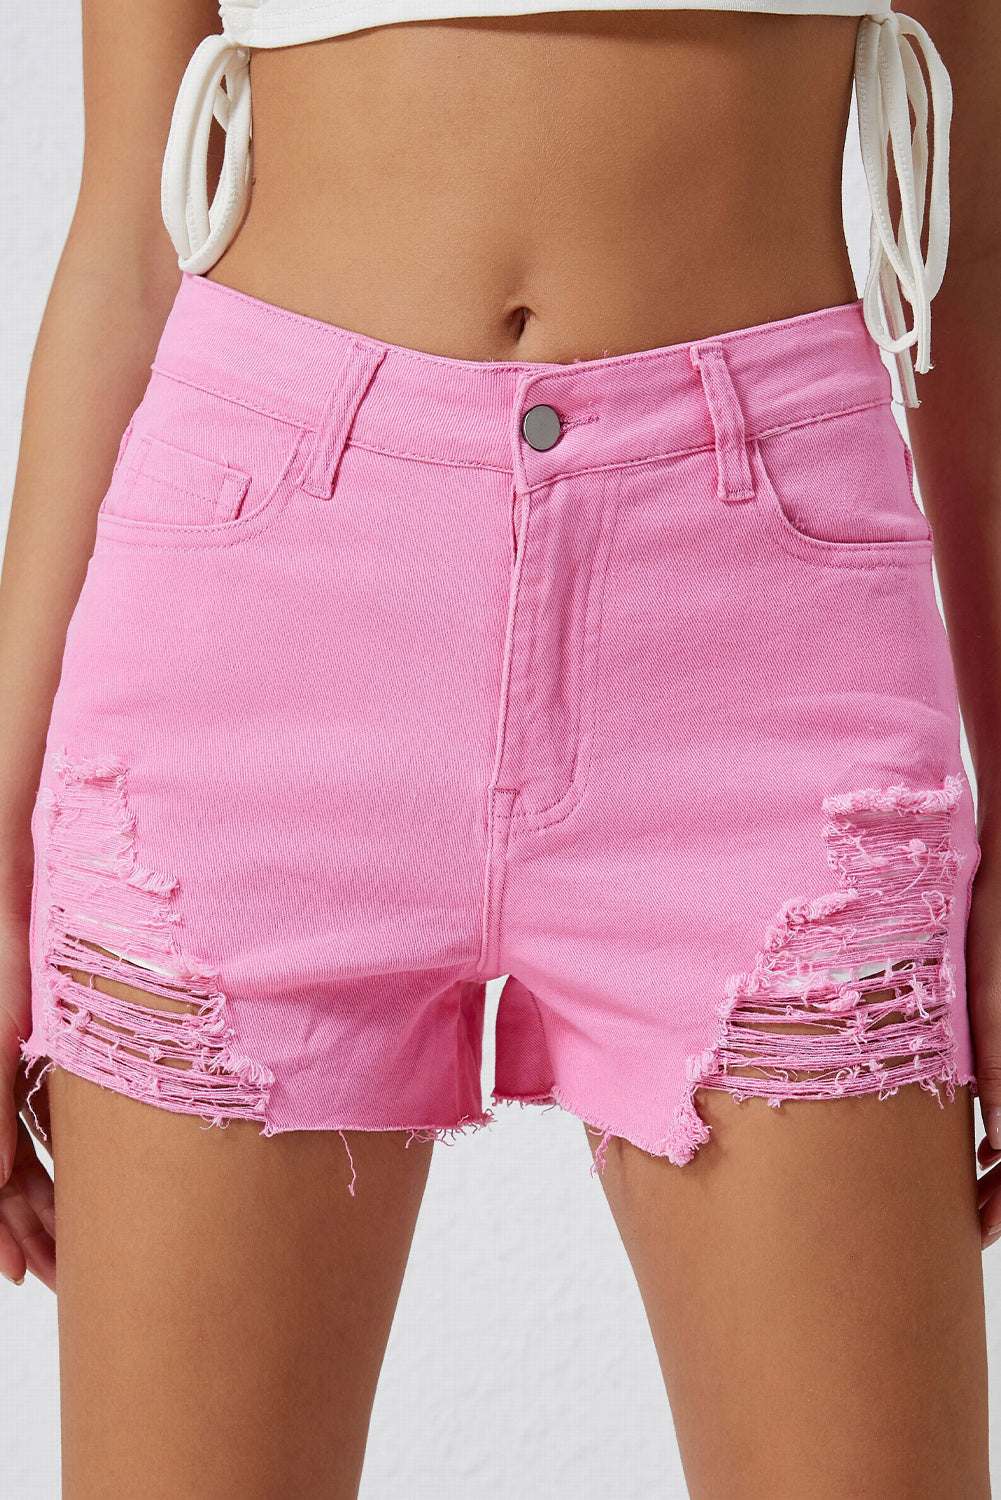 Distressed Denim Shorts - Pink / 6 - Women’s Clothing & Accessories - Shorts - 1 - 2024